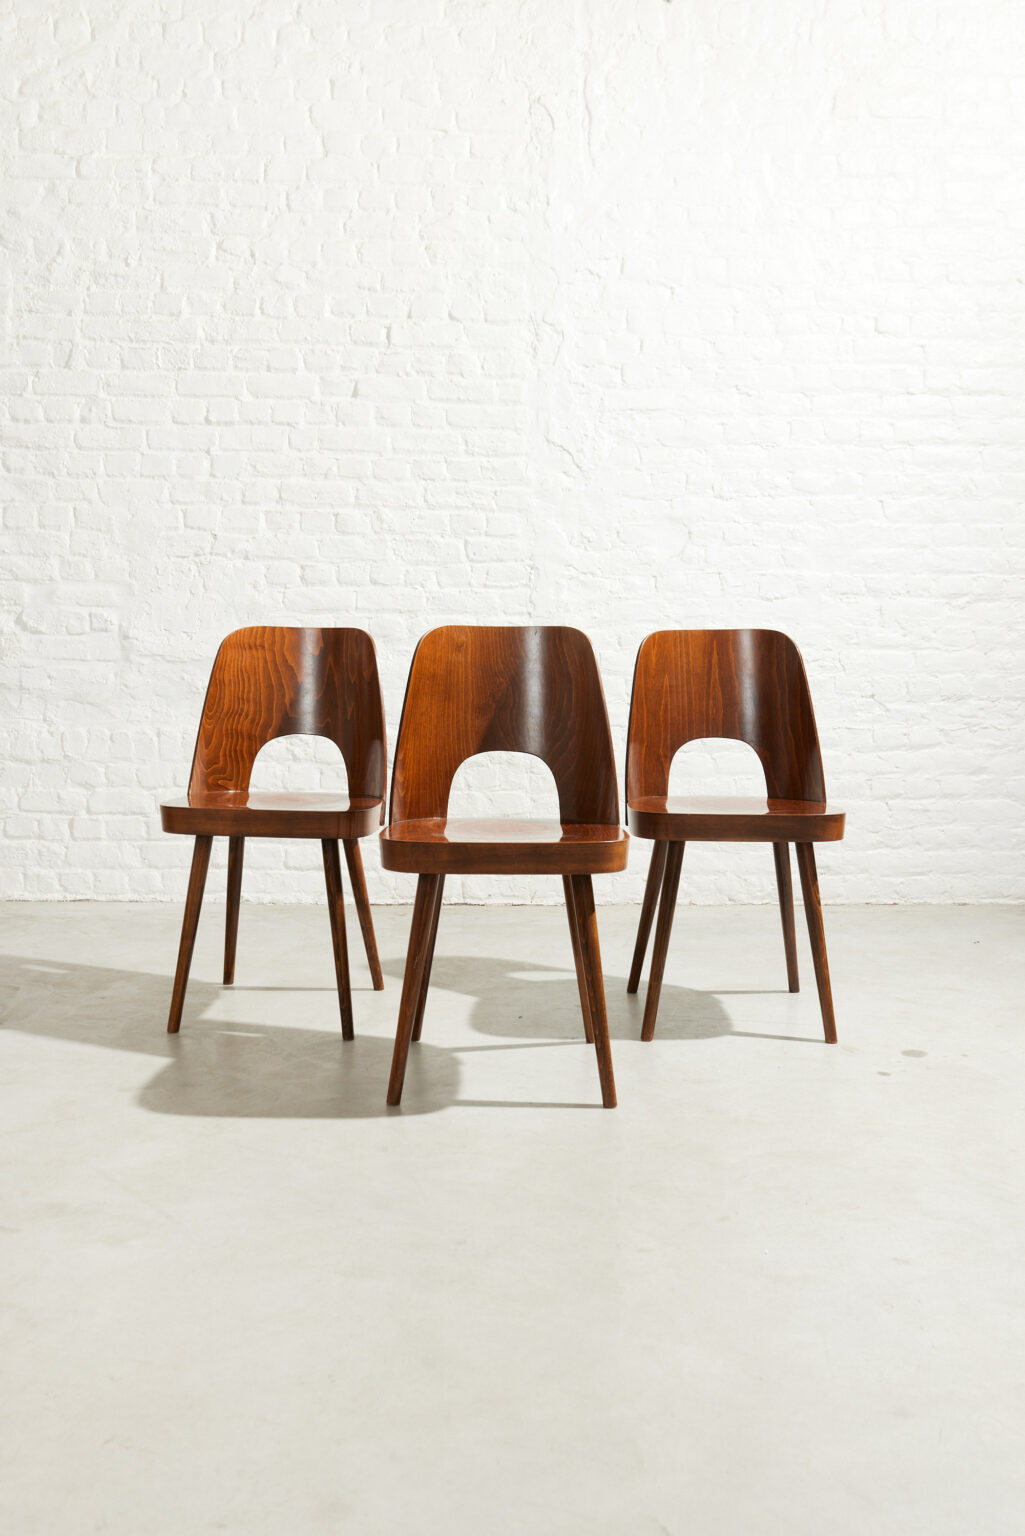 Set of 3 "No. 515" dining chairs by Oswald Haerdtl